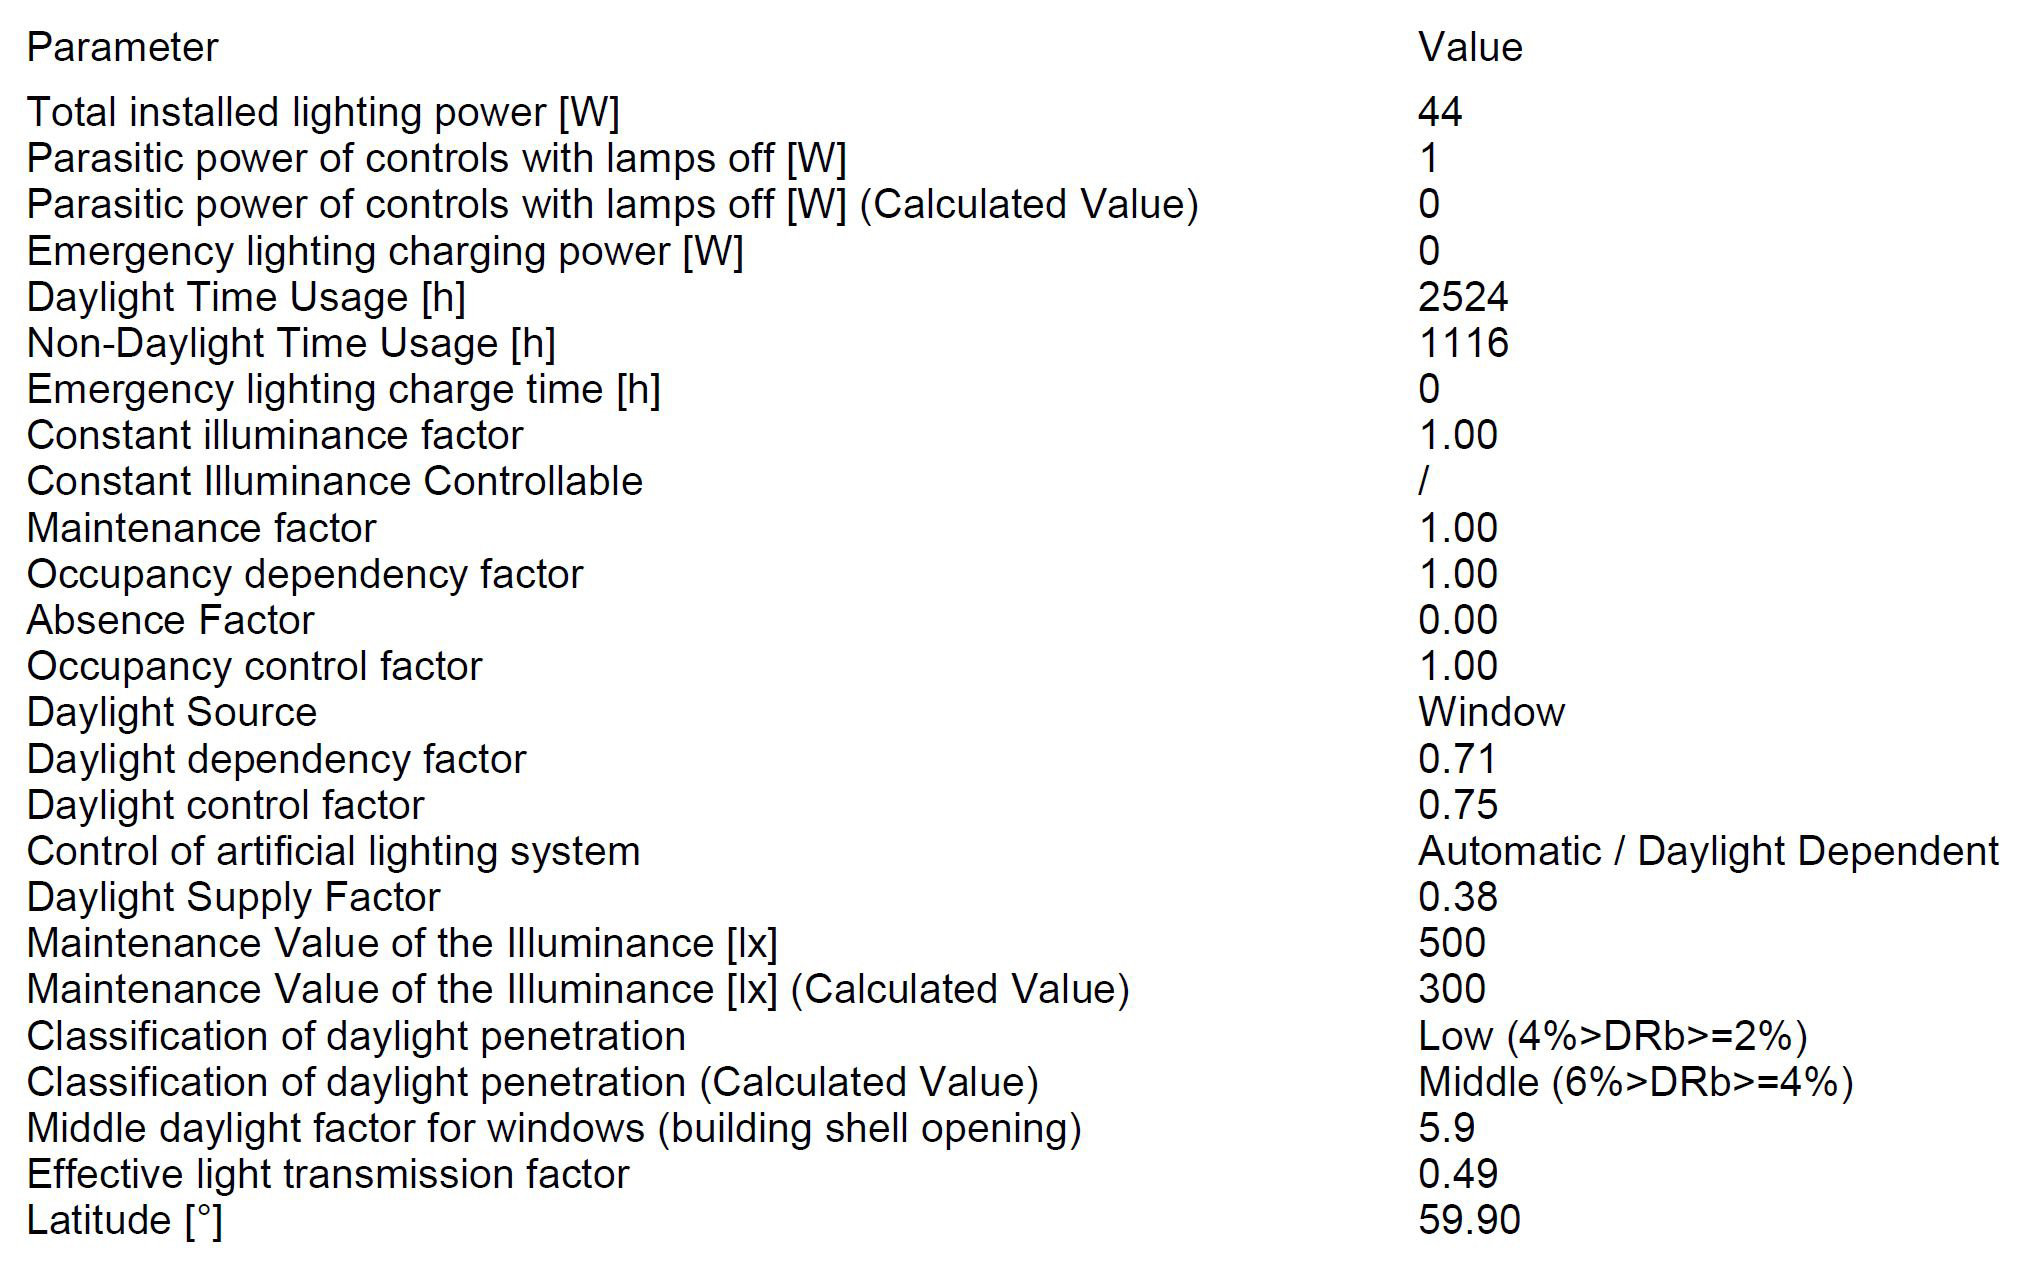 Parameters used in the calculation of the LENI value for the test office, performed in Dialux 4.13 software.